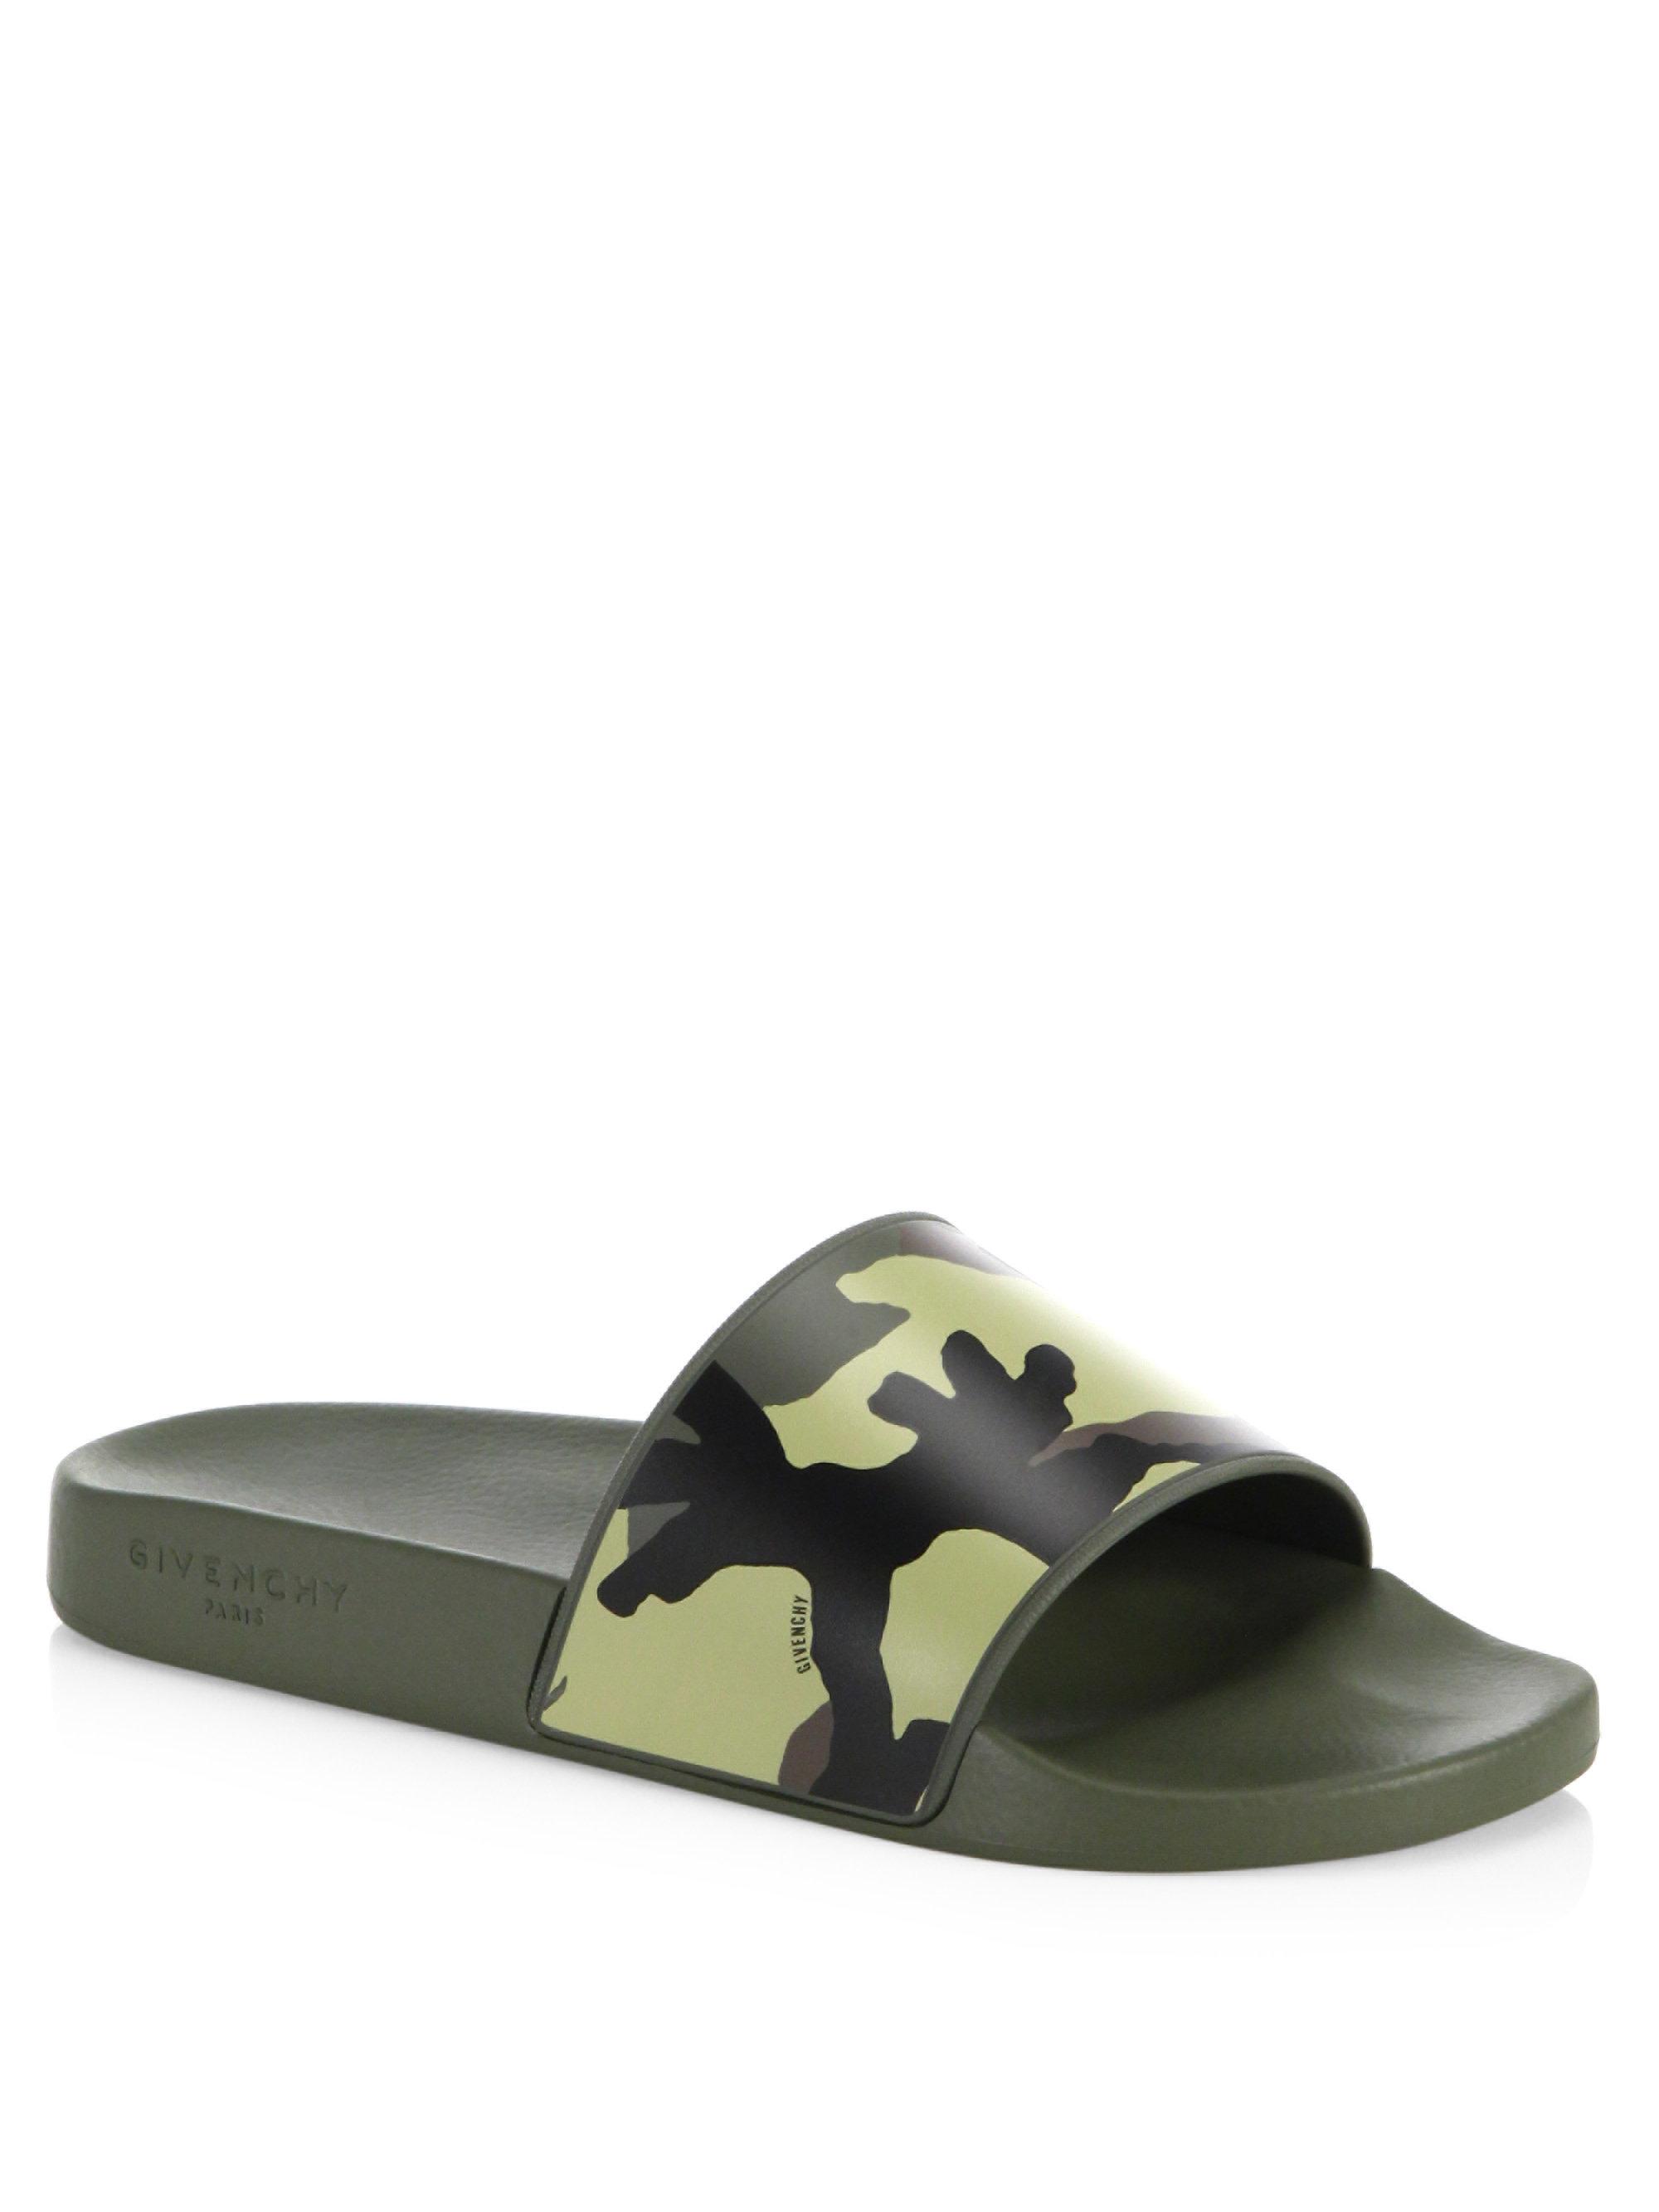 Givenchy Camo Rubber Slides in Green 